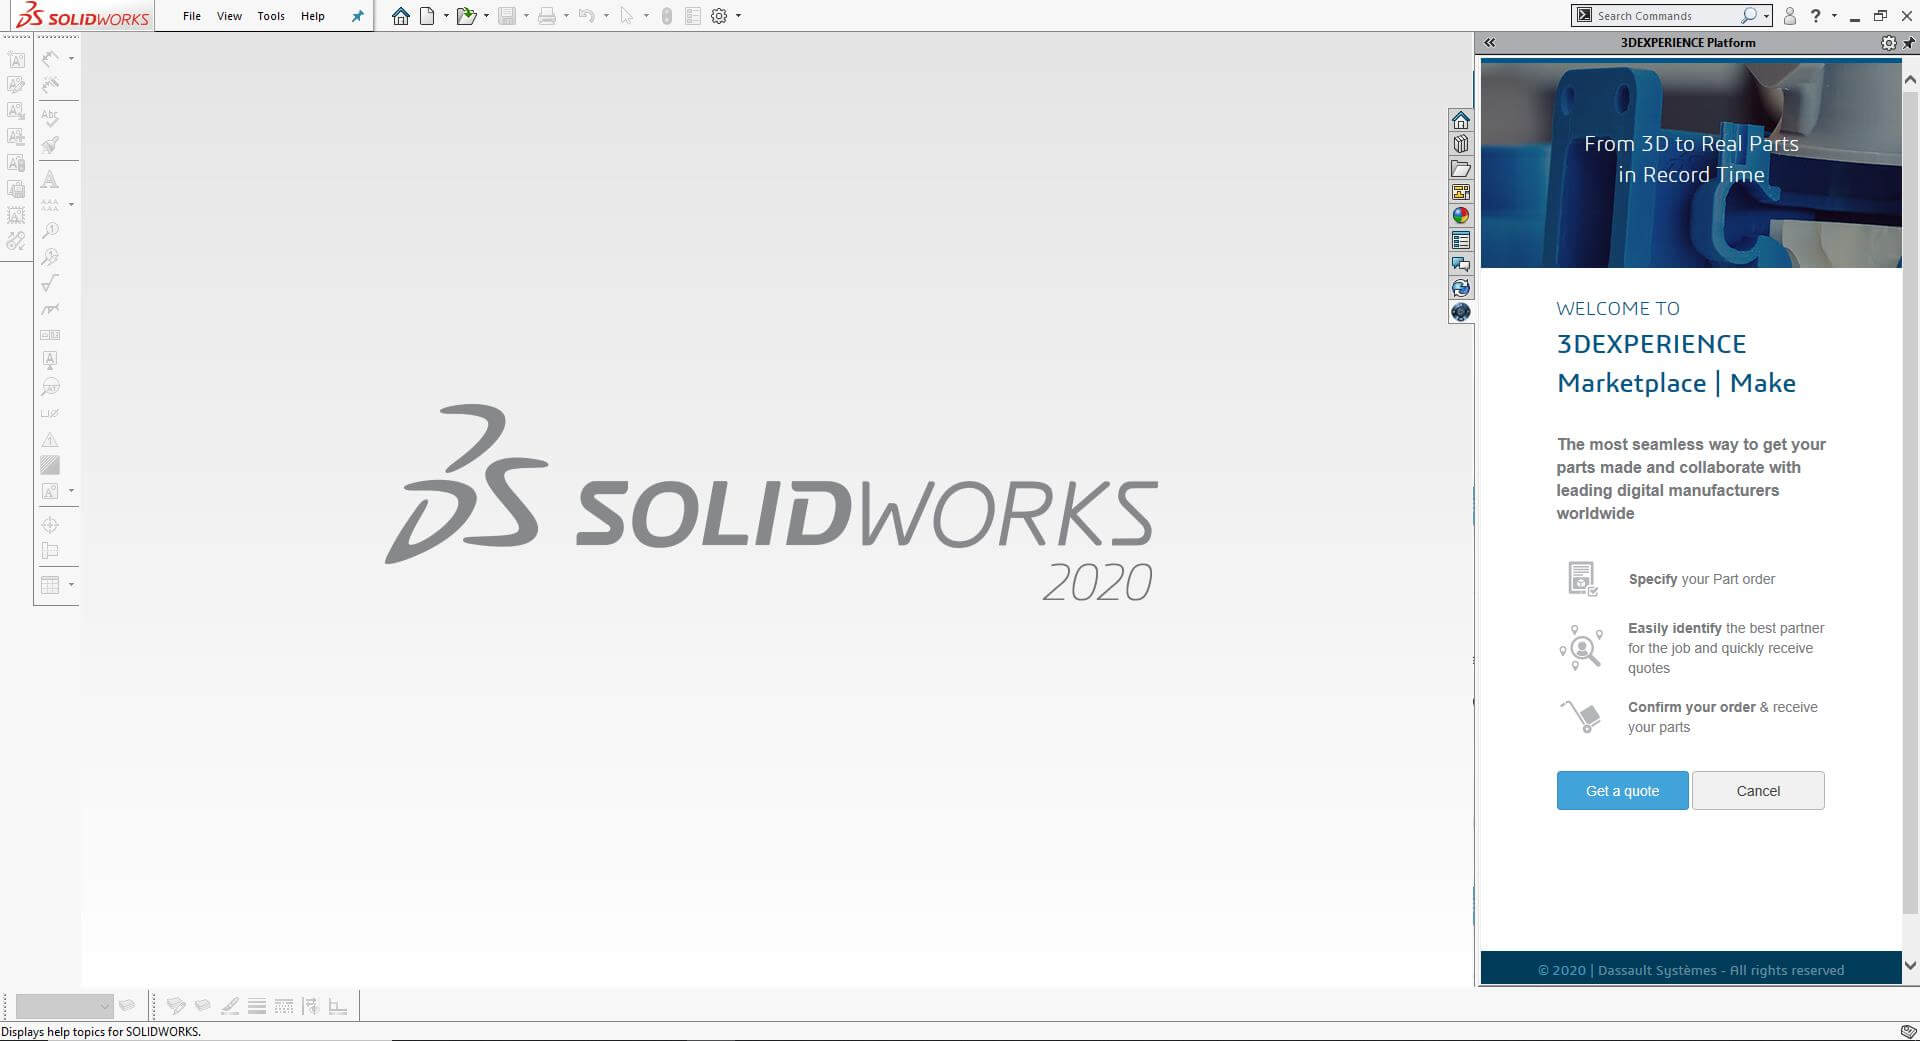 Accessing 3DEXPERIENCE Marketplace Make in SOLIDWORKS